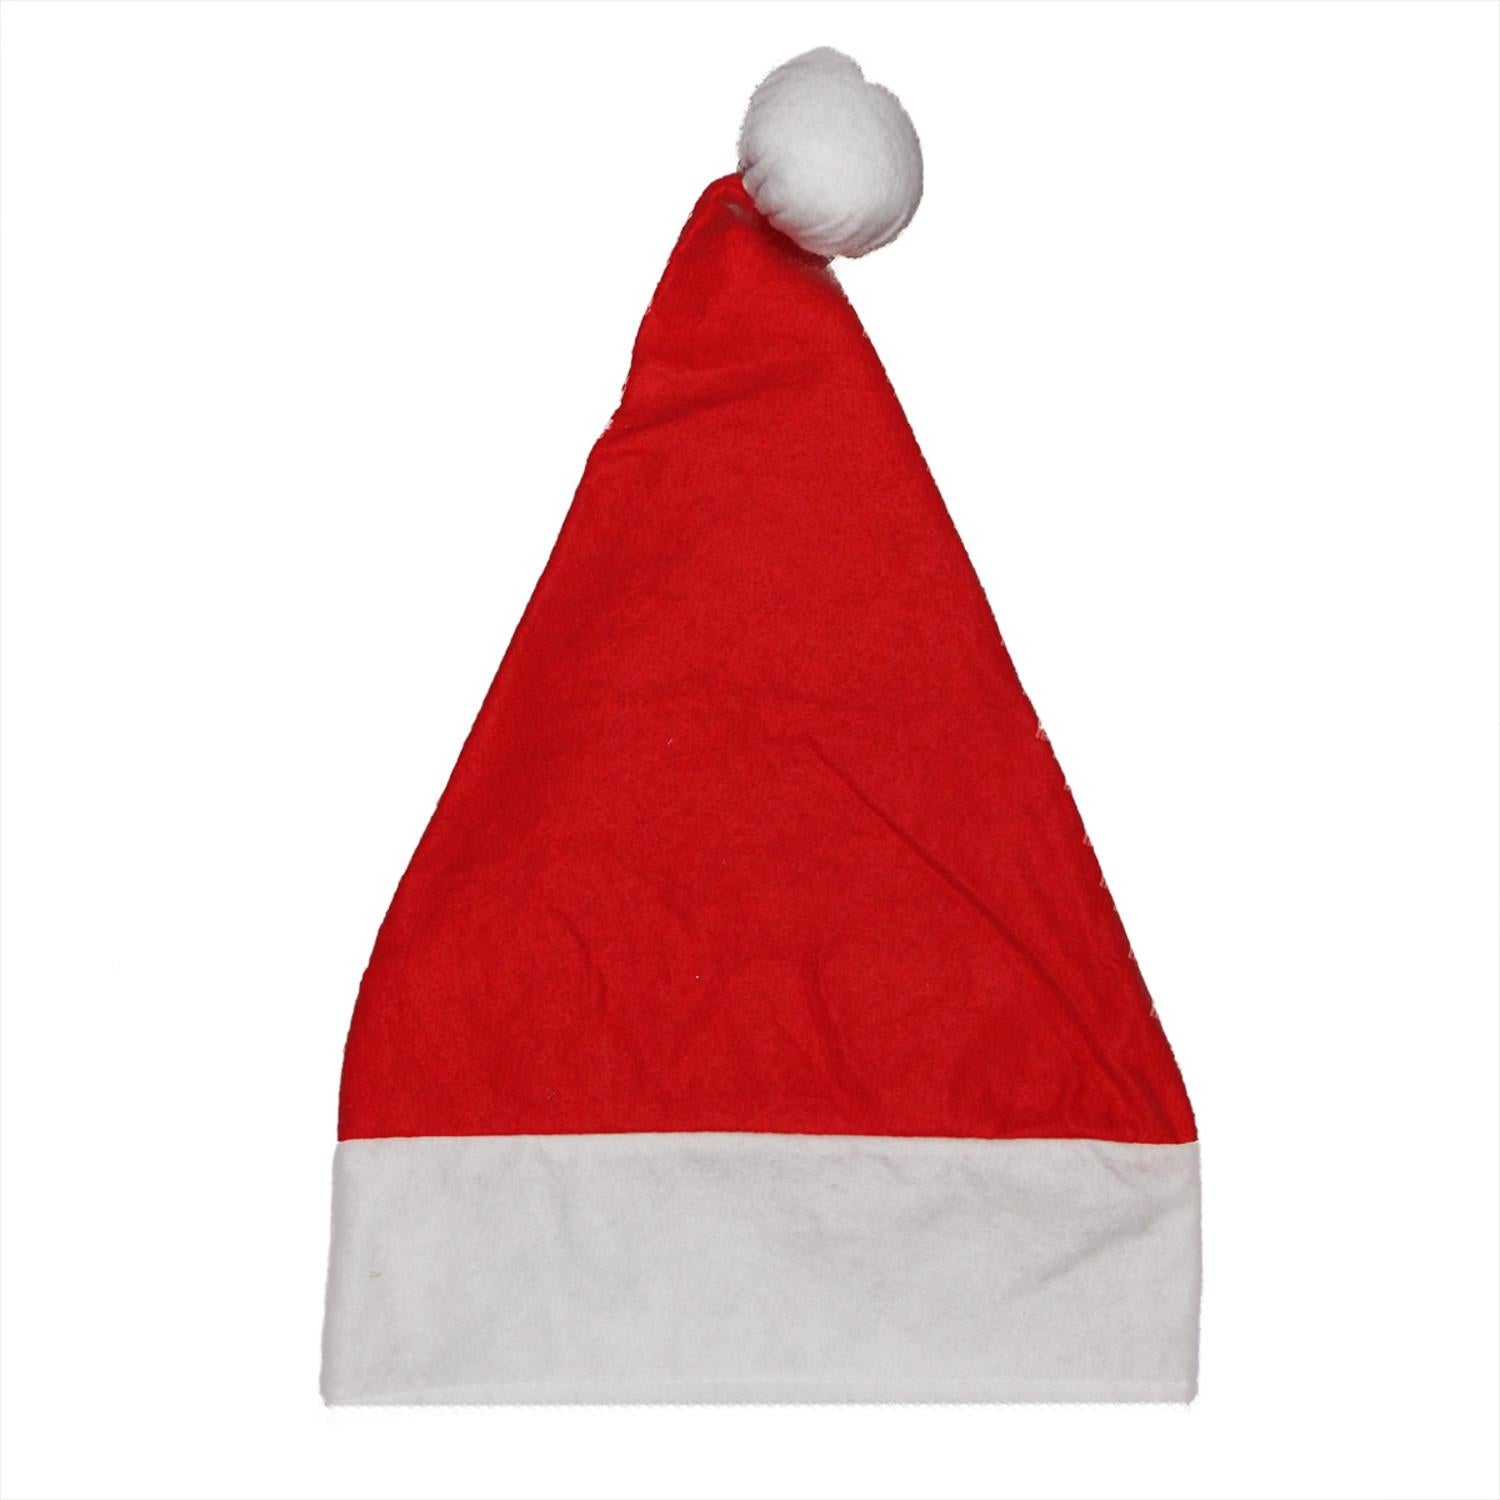 18" Traditional Red and White Felt Christmas Santa Hat - Adult Size Medium